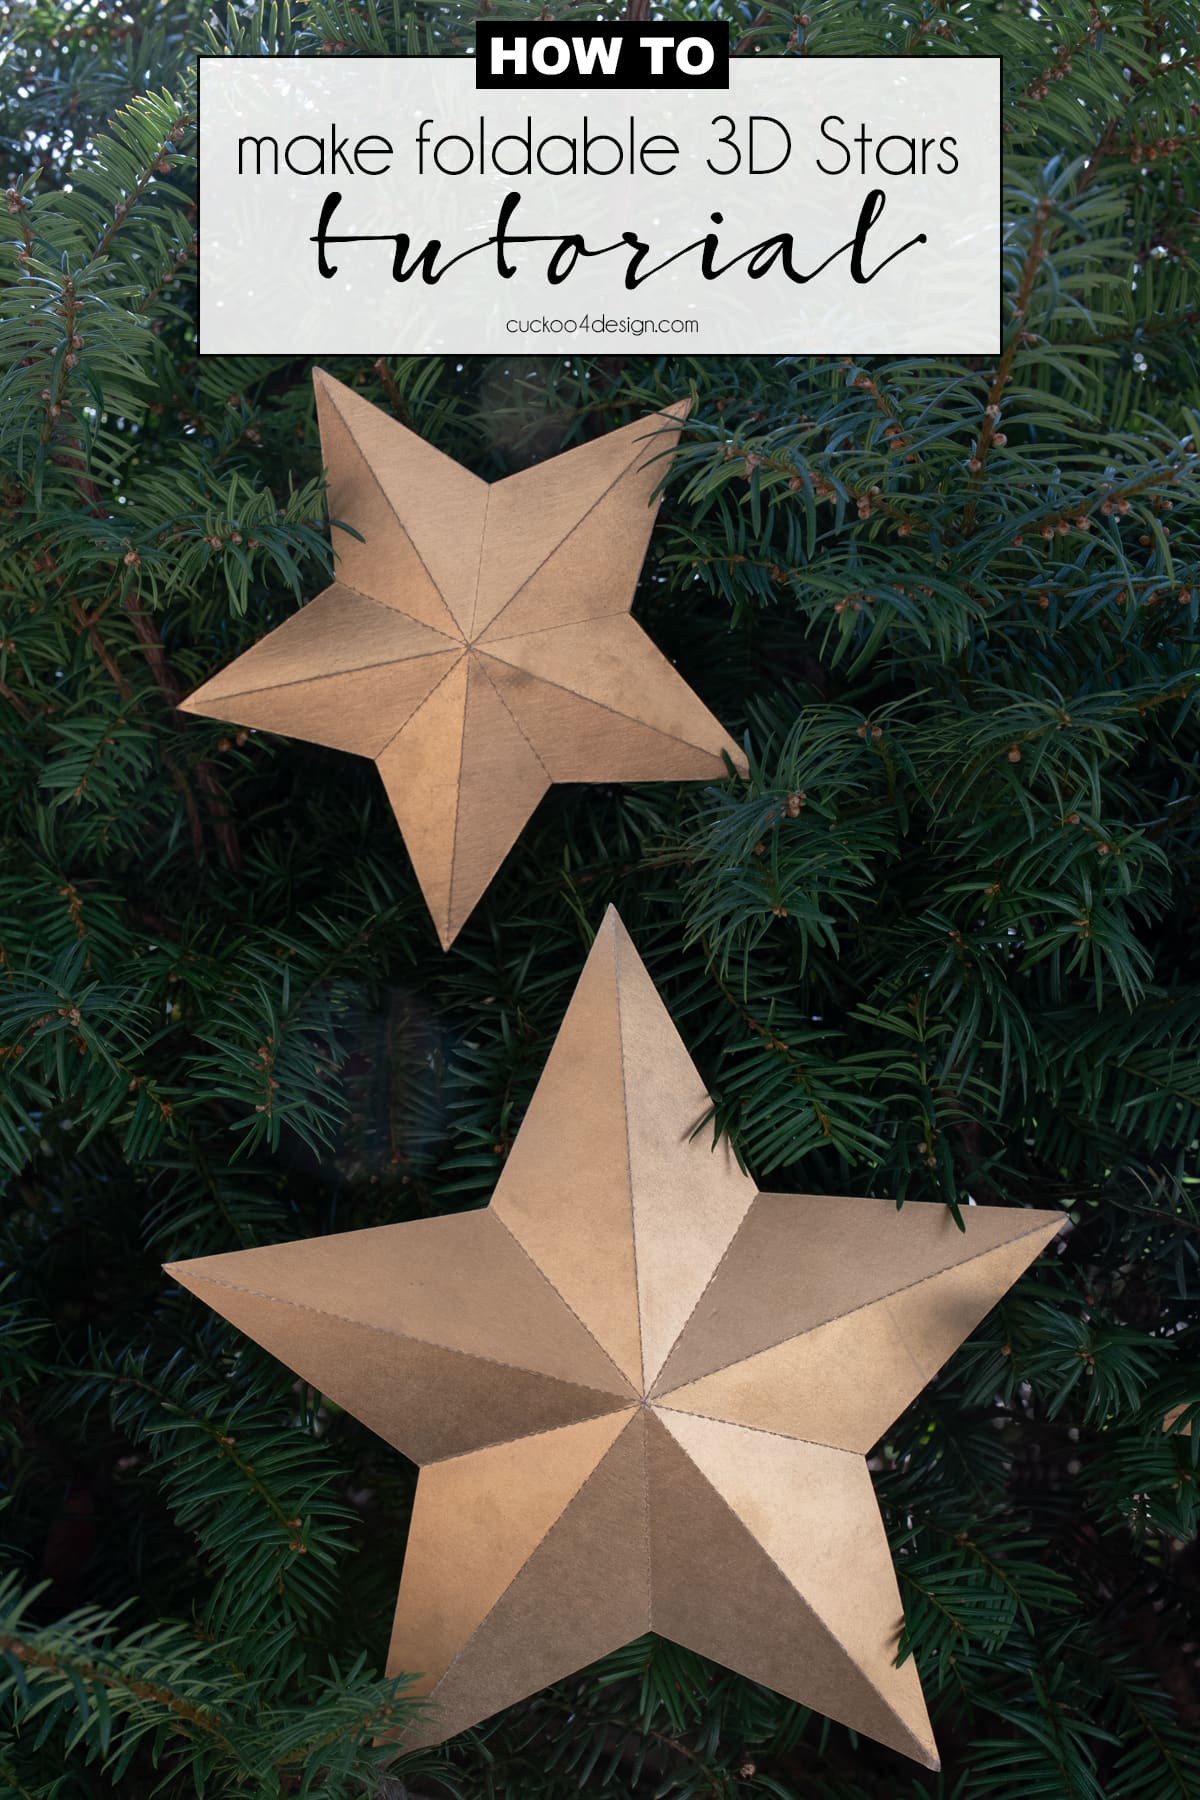 how to make foldable 3D stars with posterboard